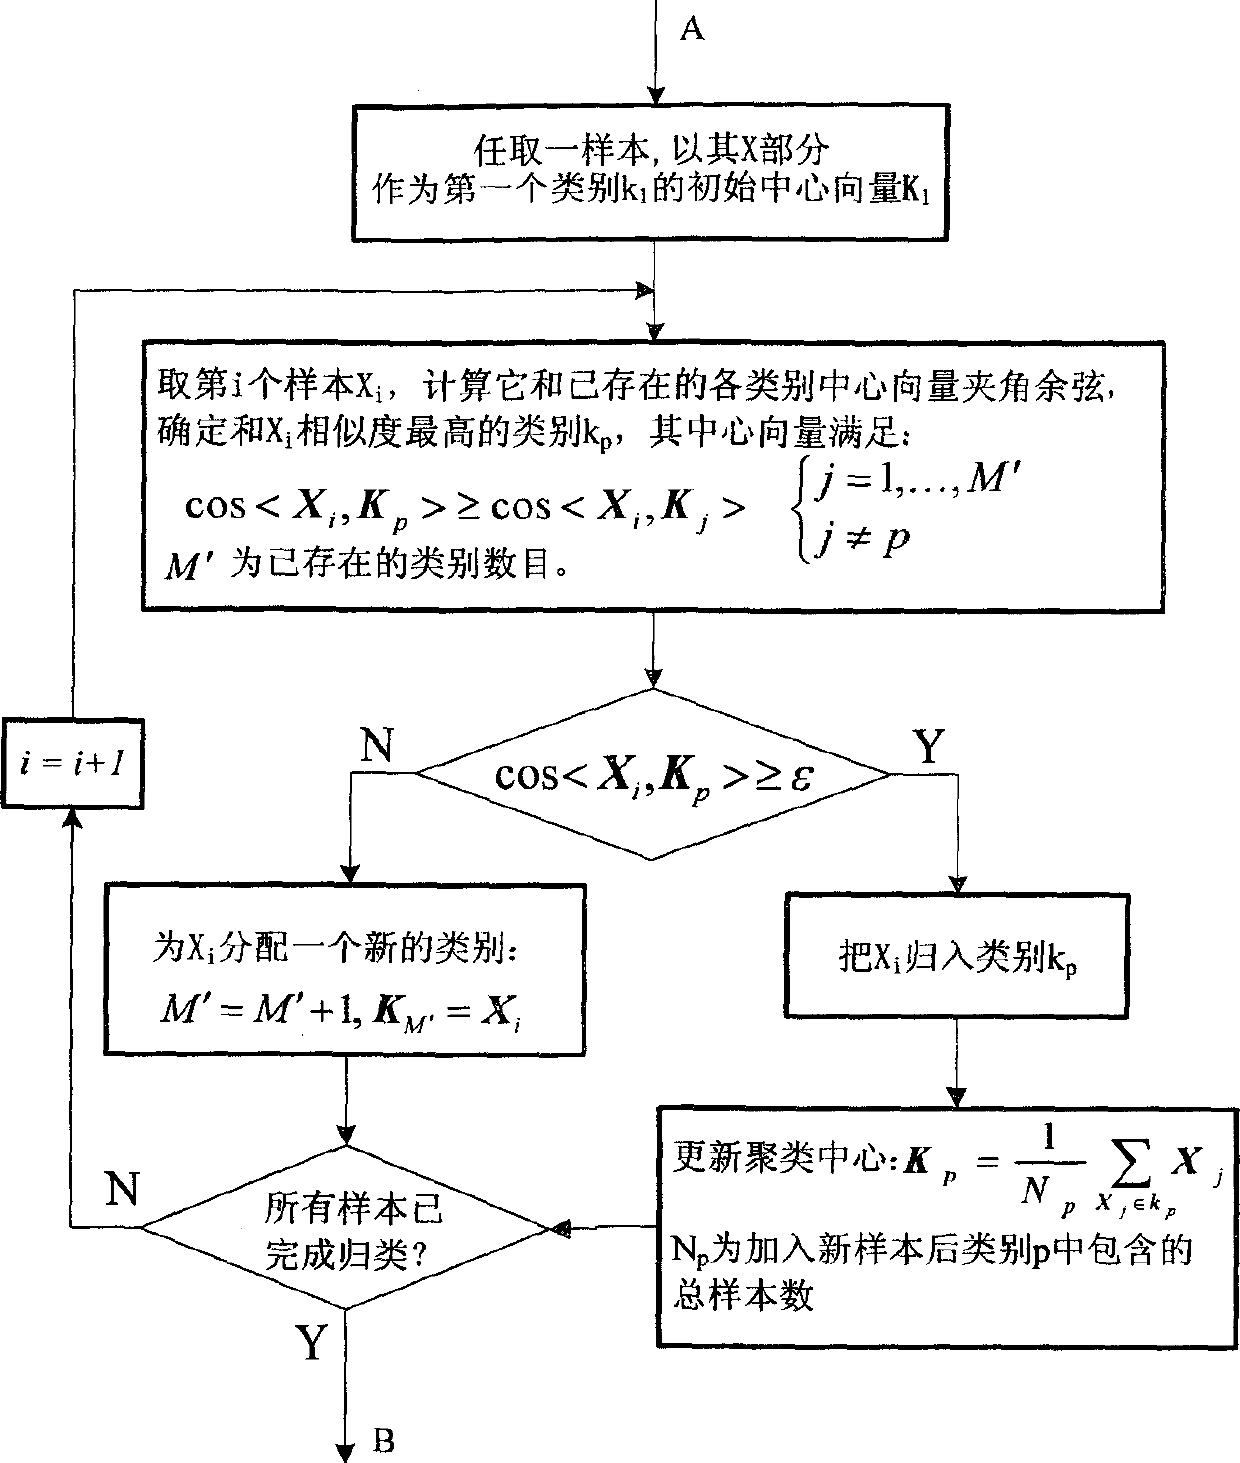 Power system voltage stable on-line monitoring and prevention control method based on probability